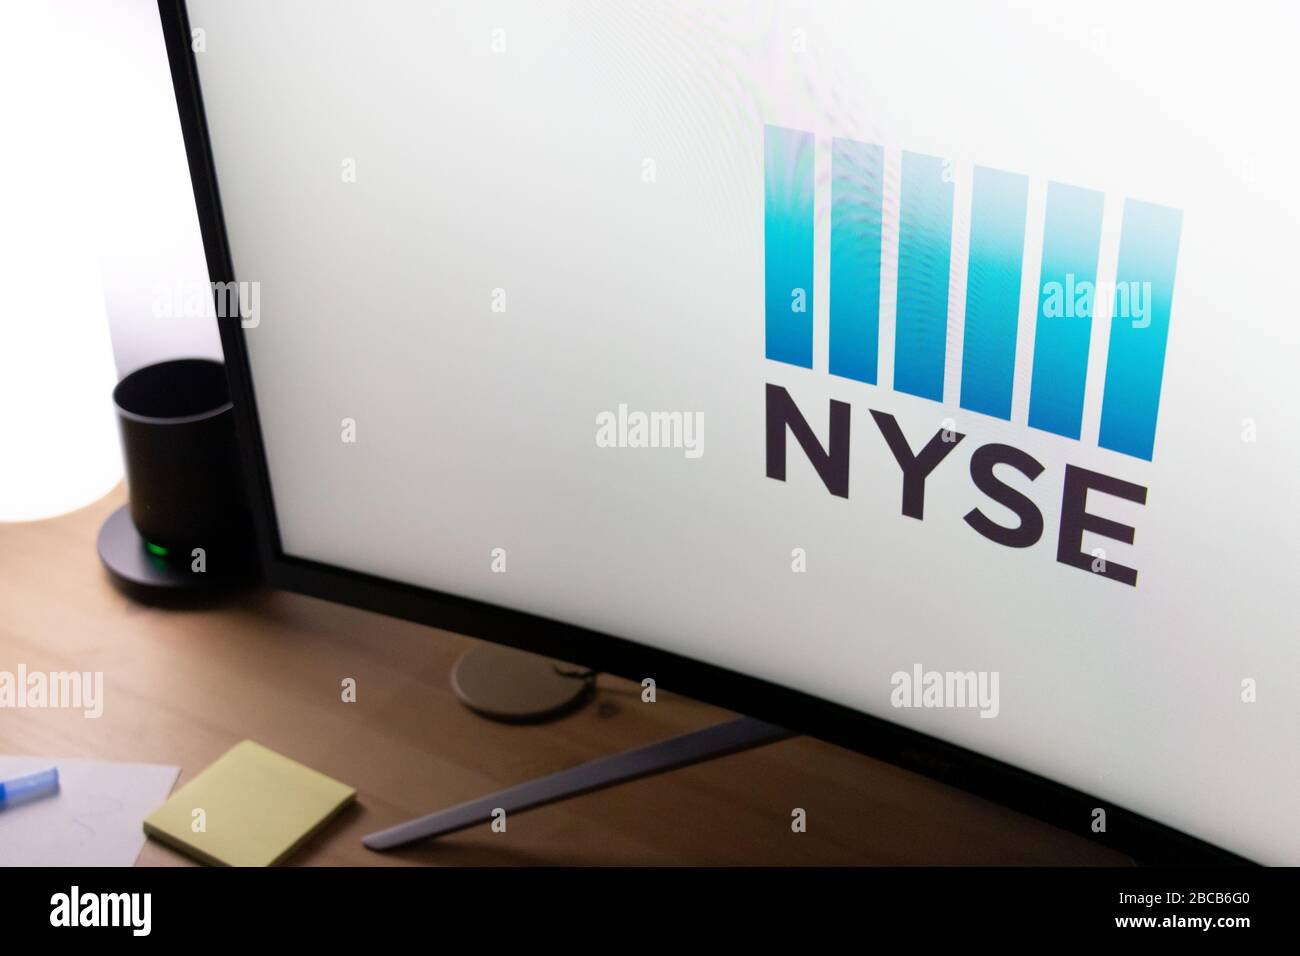 New York Stock Exchange (NYSE) logo displayed on a computer monitor on a desk. Stock Photo